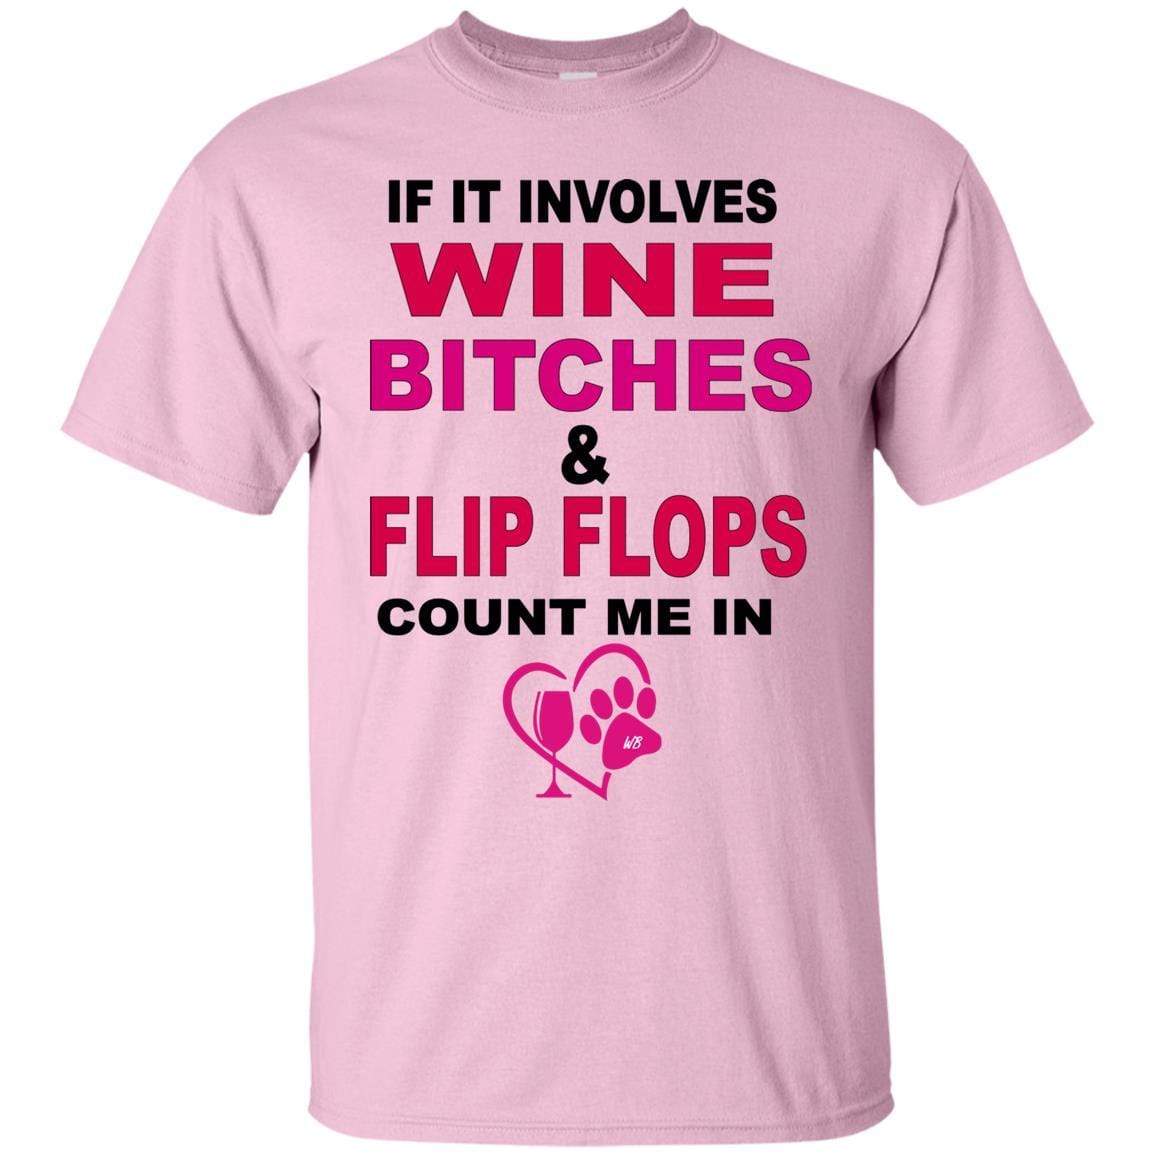 T-Shirts Light Pink / S WineyBitches.co " If It Involves Wine Bitches & Flip Flops I'm In" Ultra Cotton Unisex T-Shirt WineyBitches.co Hilariously Funny T-Shirt for Wine & Dog Lovers   WineyBitchesCo